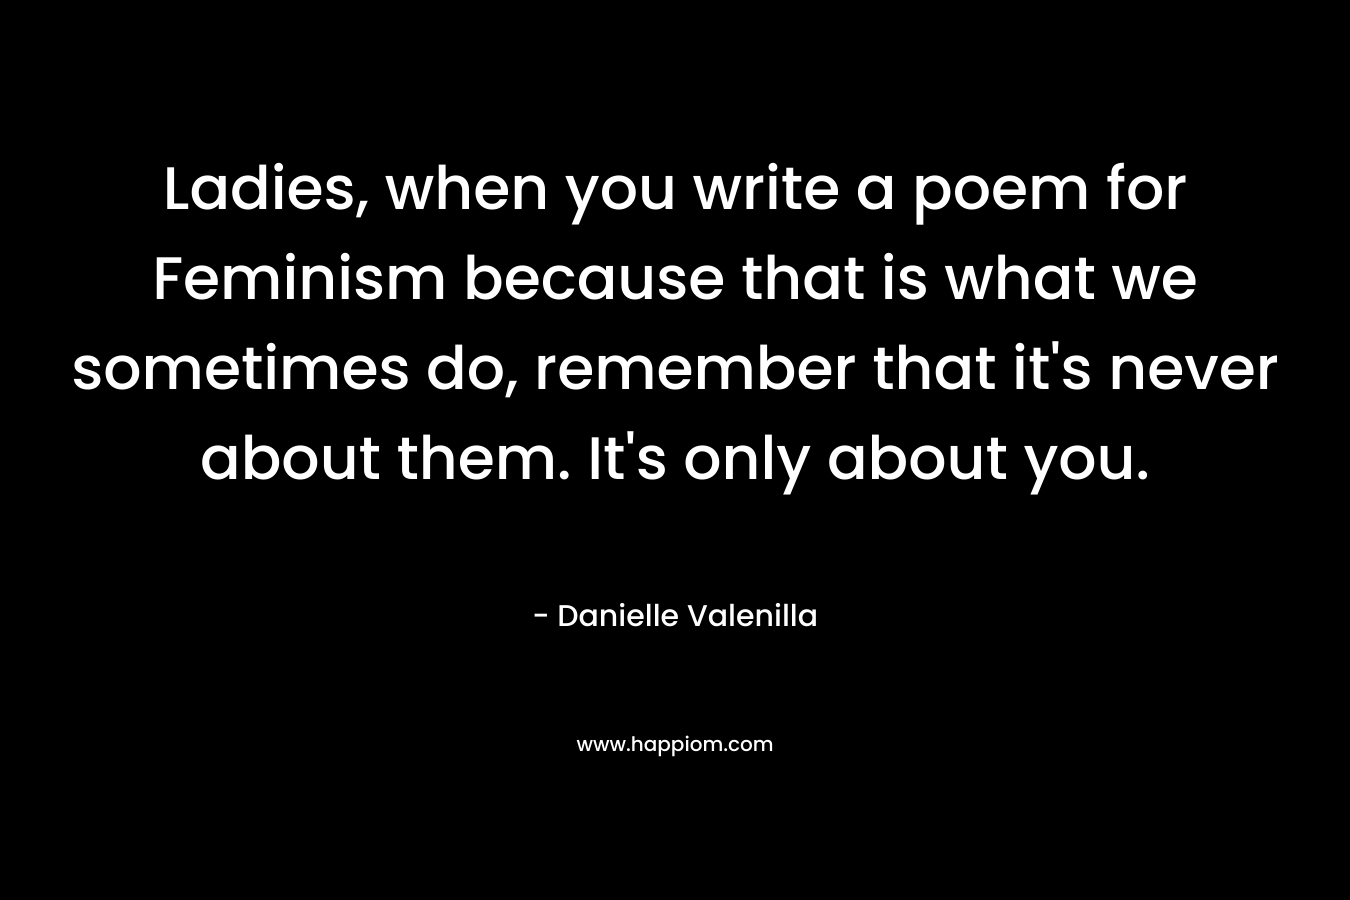 Ladies, when you write a poem for Feminism because that is what we sometimes do, remember that it's never about them. It's only about you.